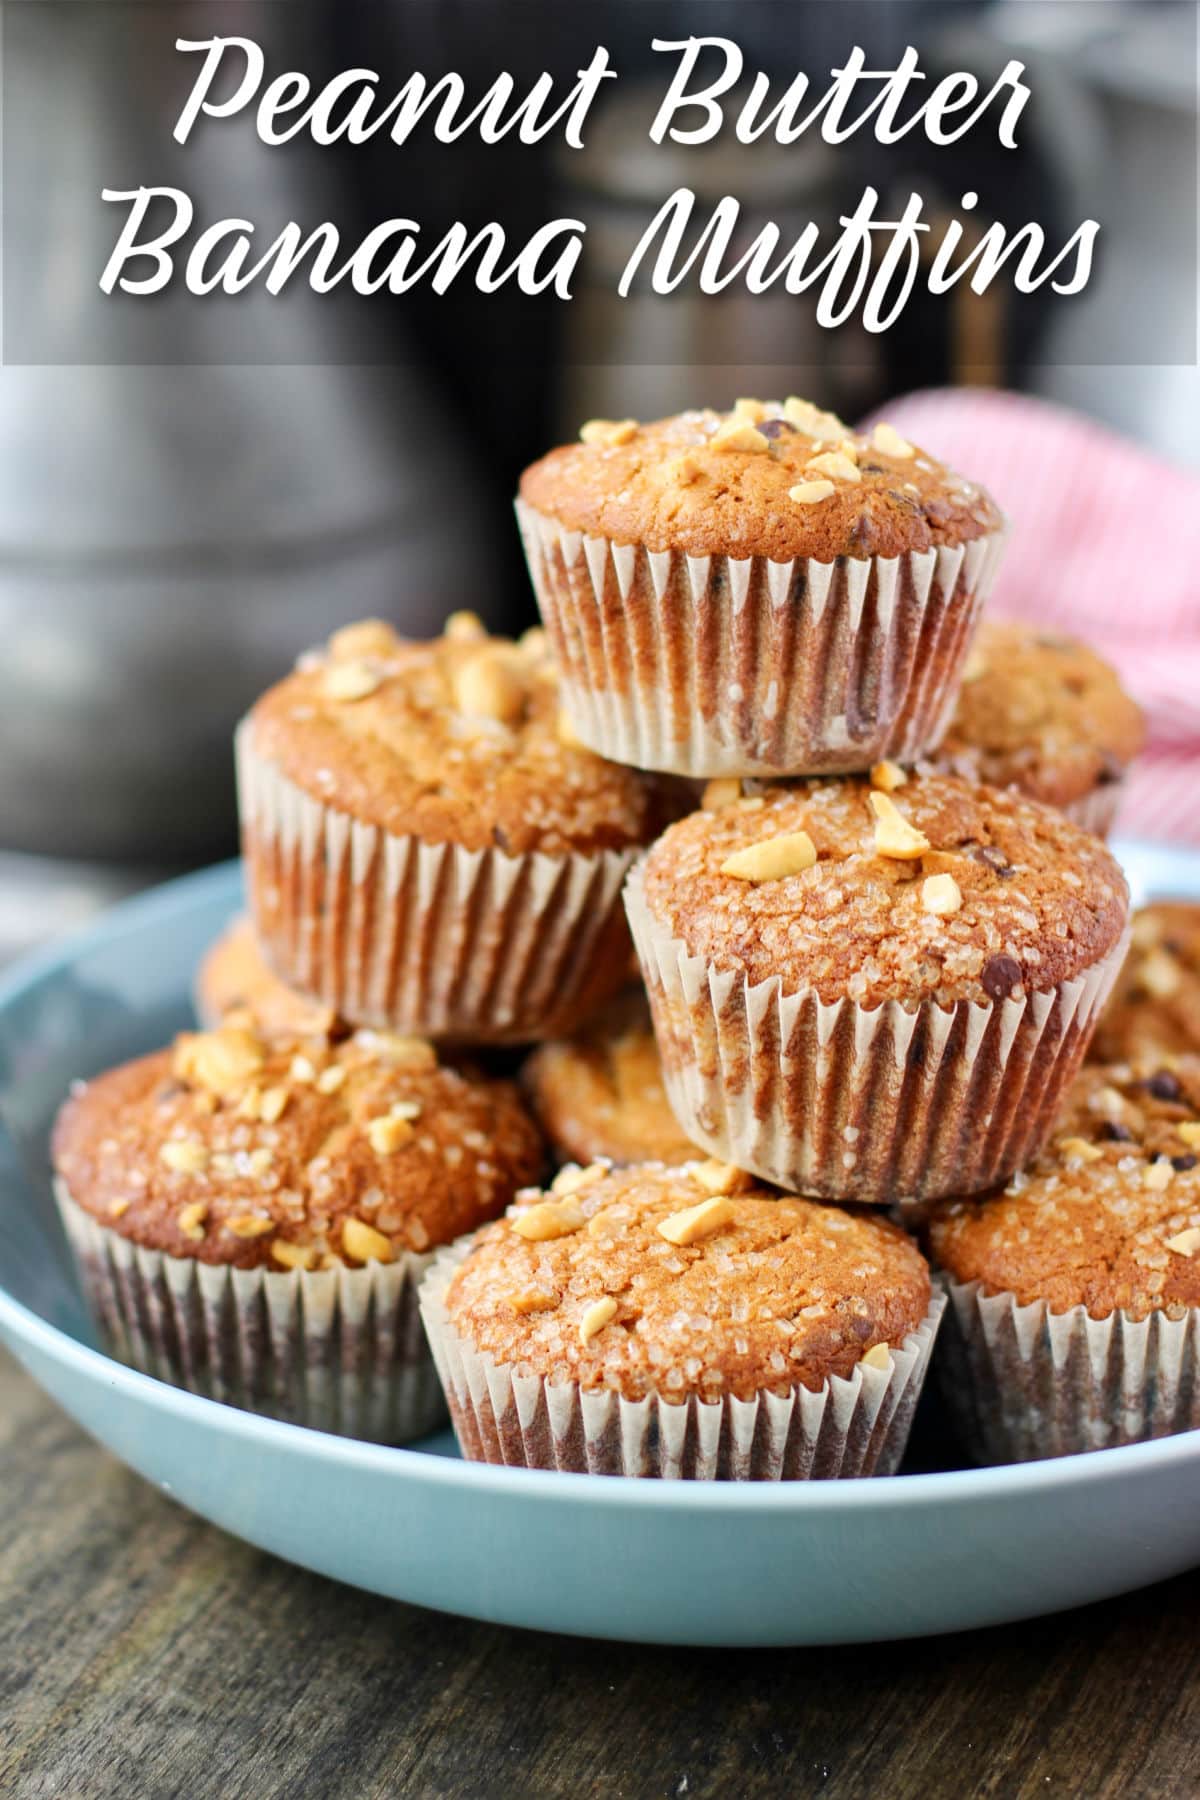 Peanut Butter Banana Muffins in a bowl.